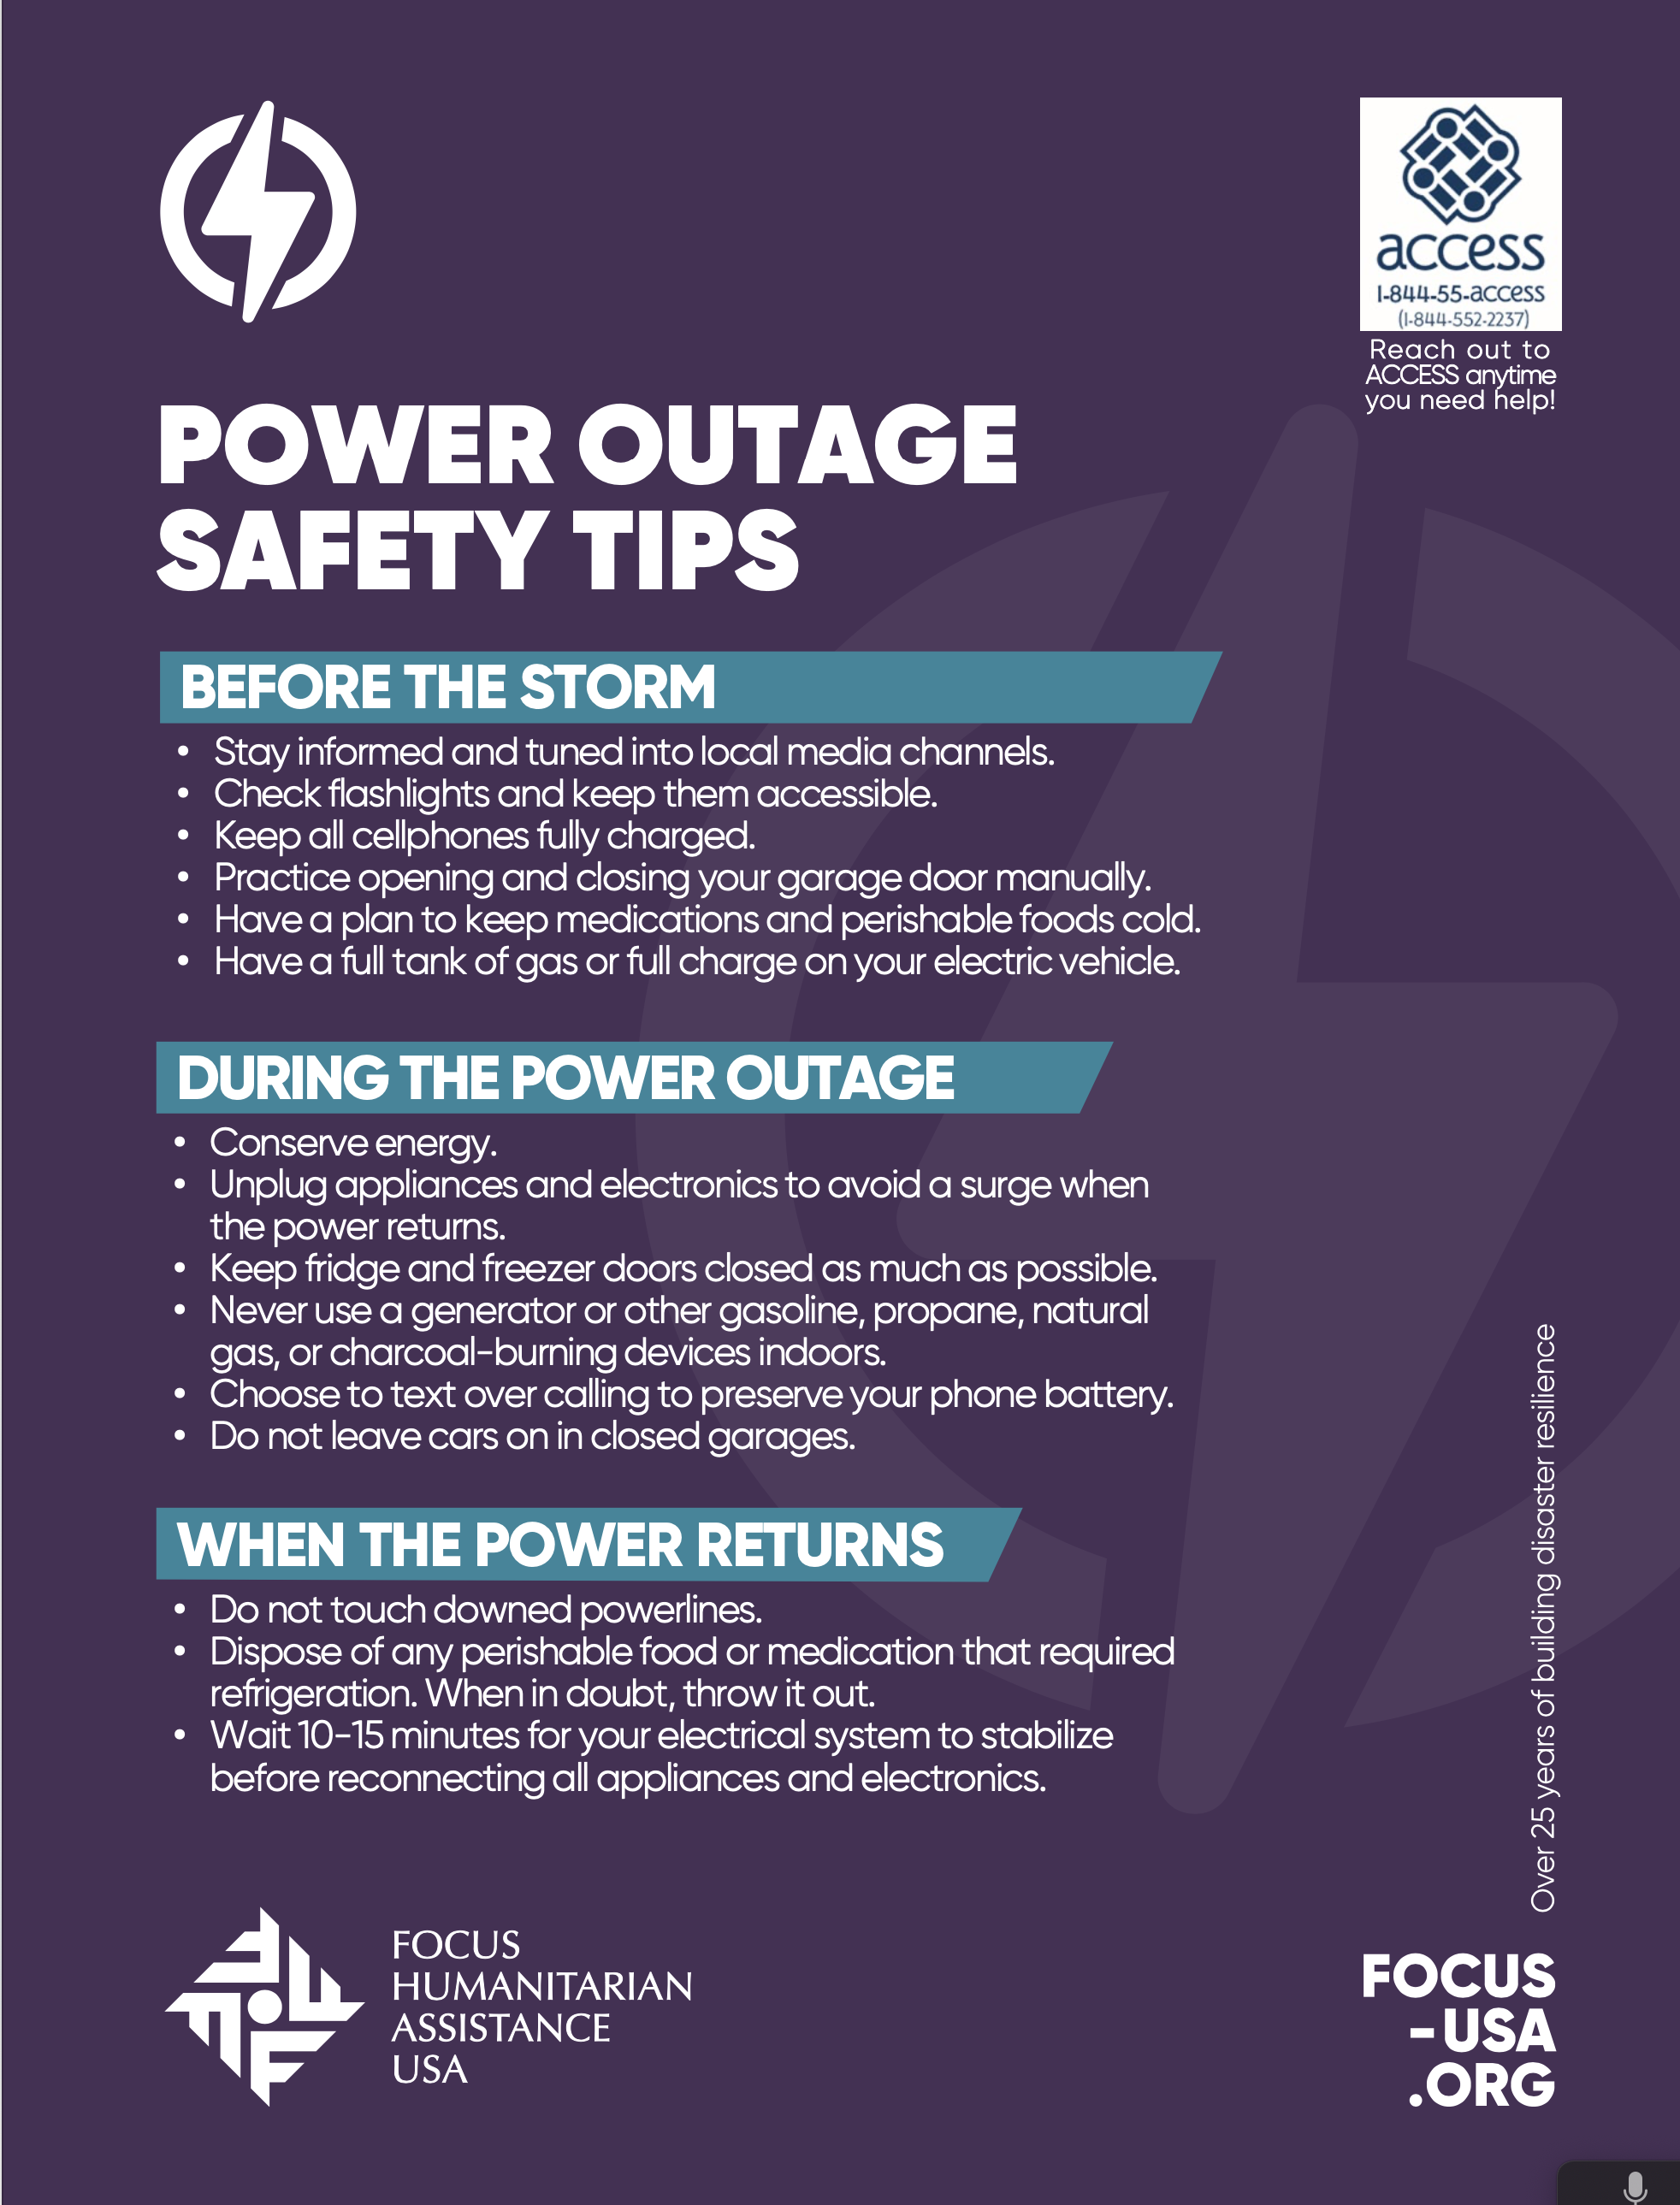 Power Outage Safety Checklist